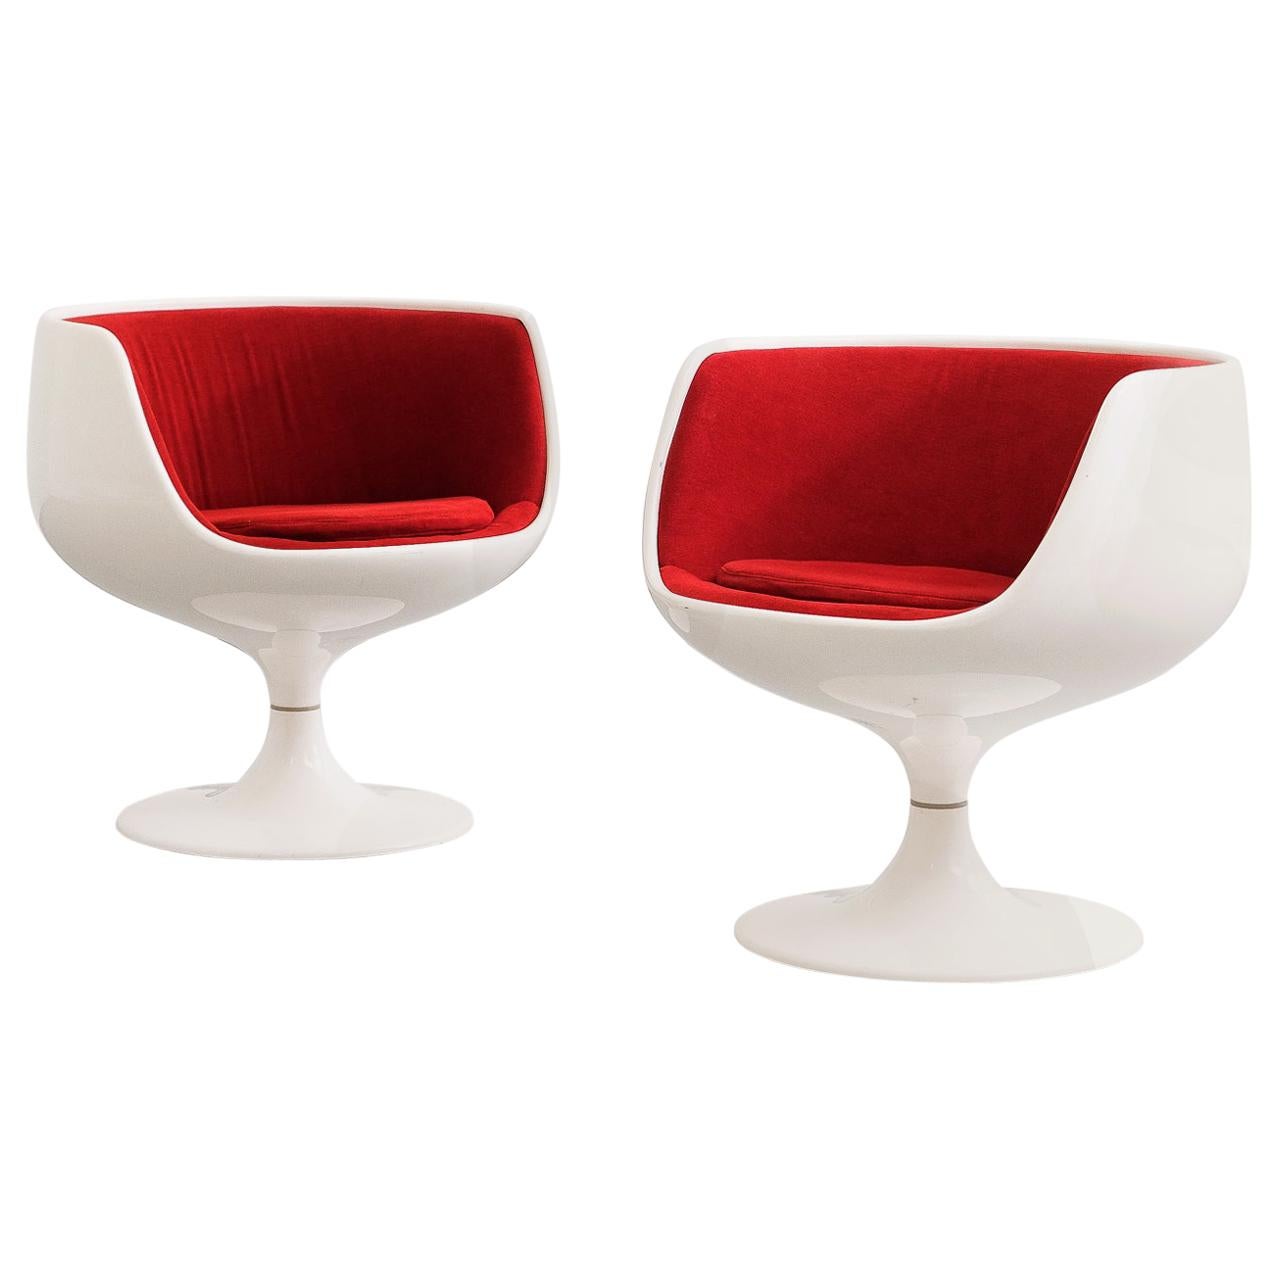 Cognac V.S.O.P Chairs by Eero Aarnio for Asko, 1960s, Set of 2